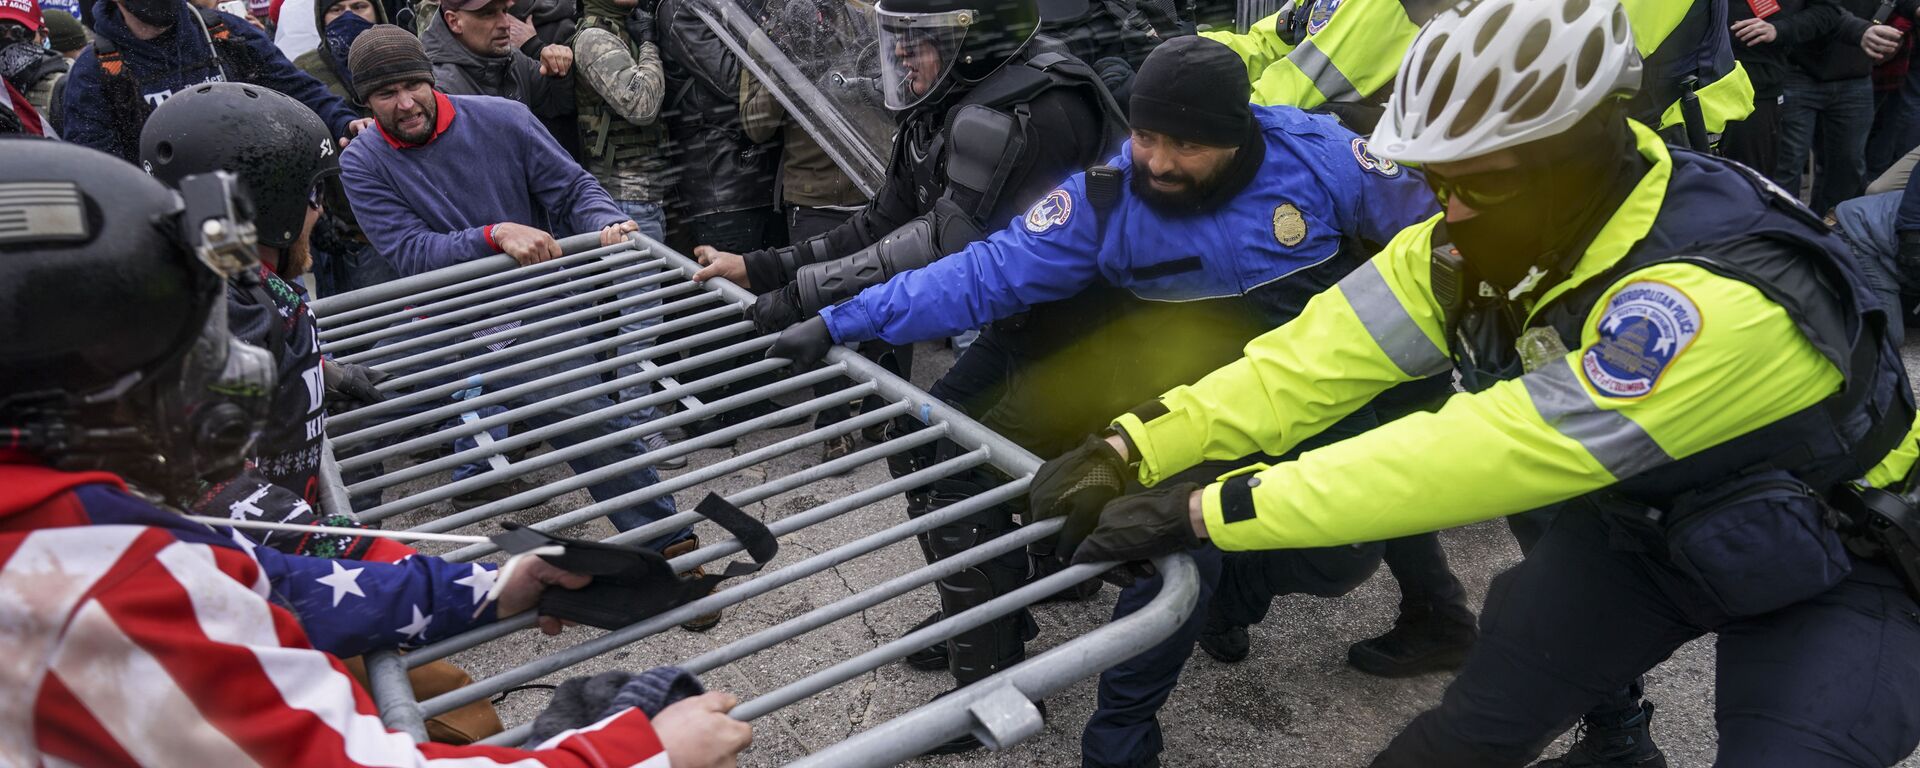 Trump supporters try to break through a police barrier, Wednesday, Jan. 6, 2021, at the Capitol in Washington - Sputnik International, 1920, 31.05.2021